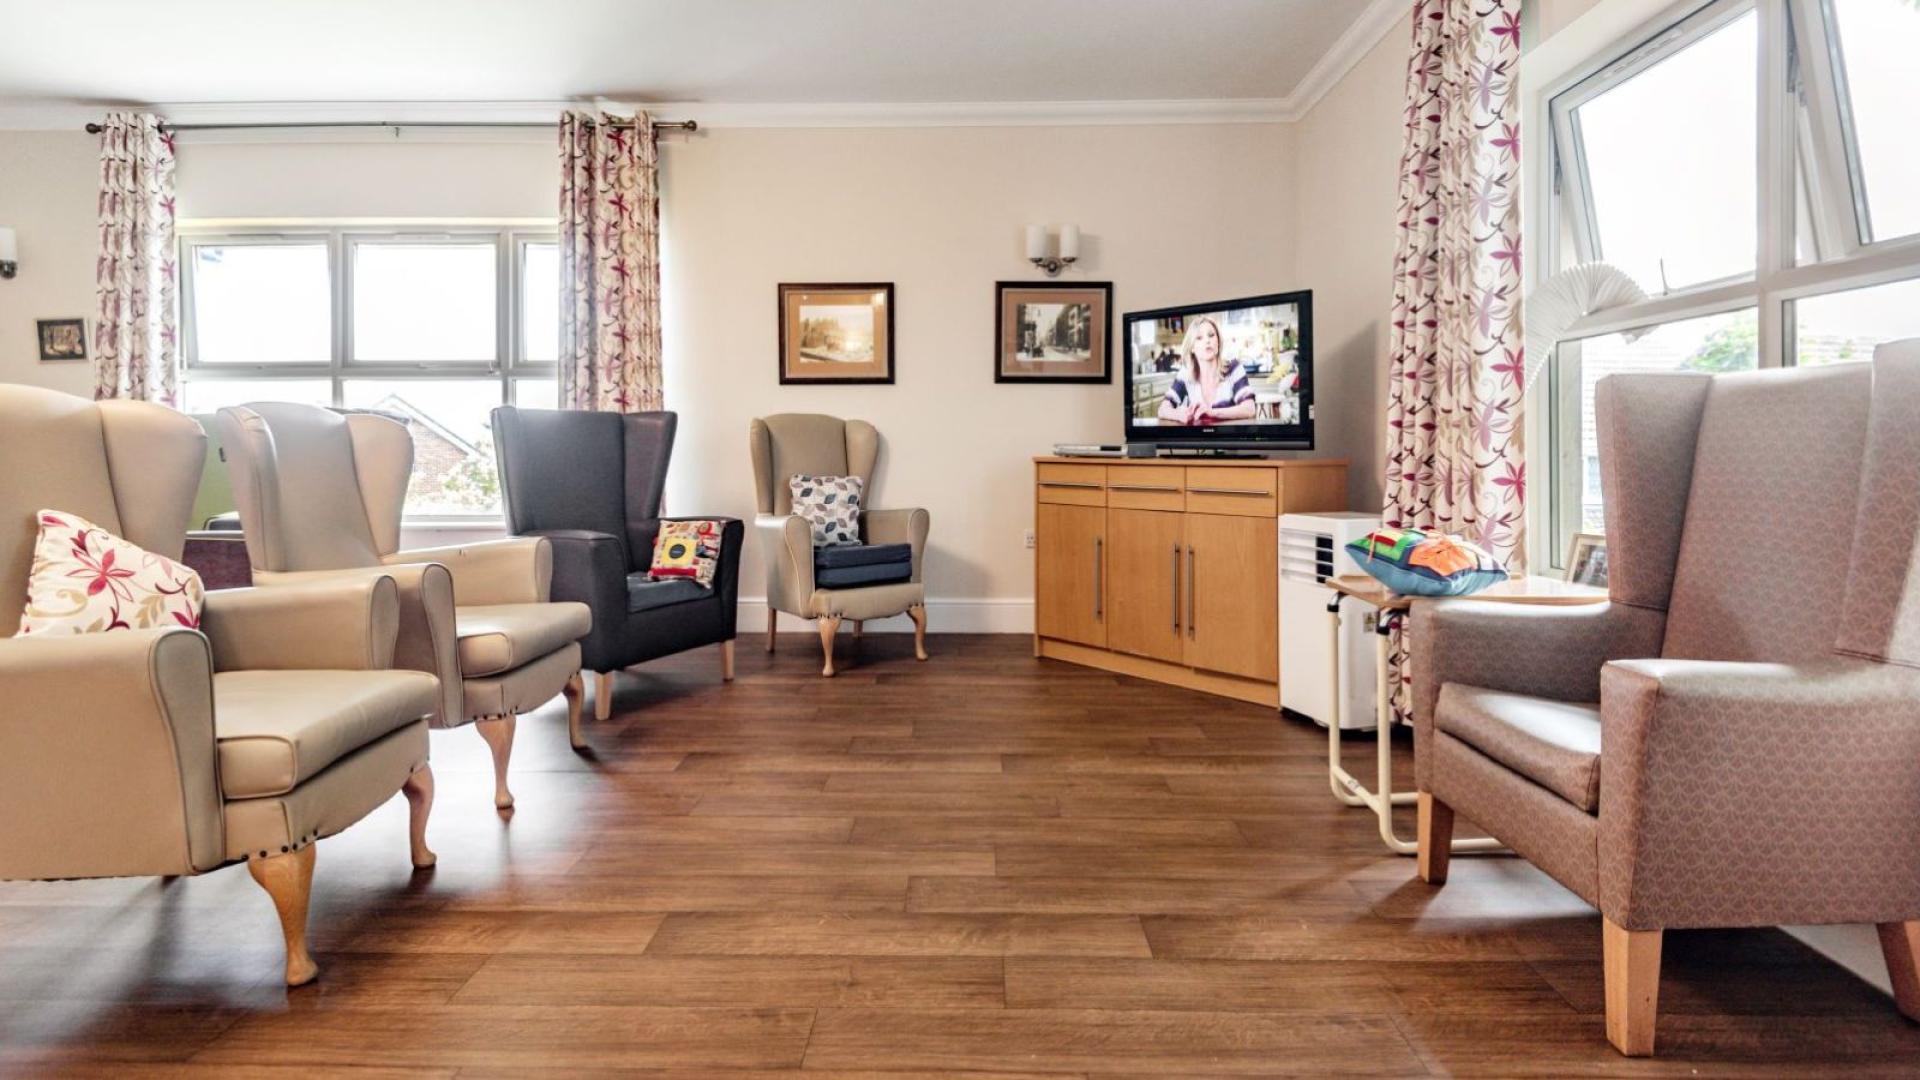 Cosy living area at Nesfield Lodge Dementia Care Home in Leeds